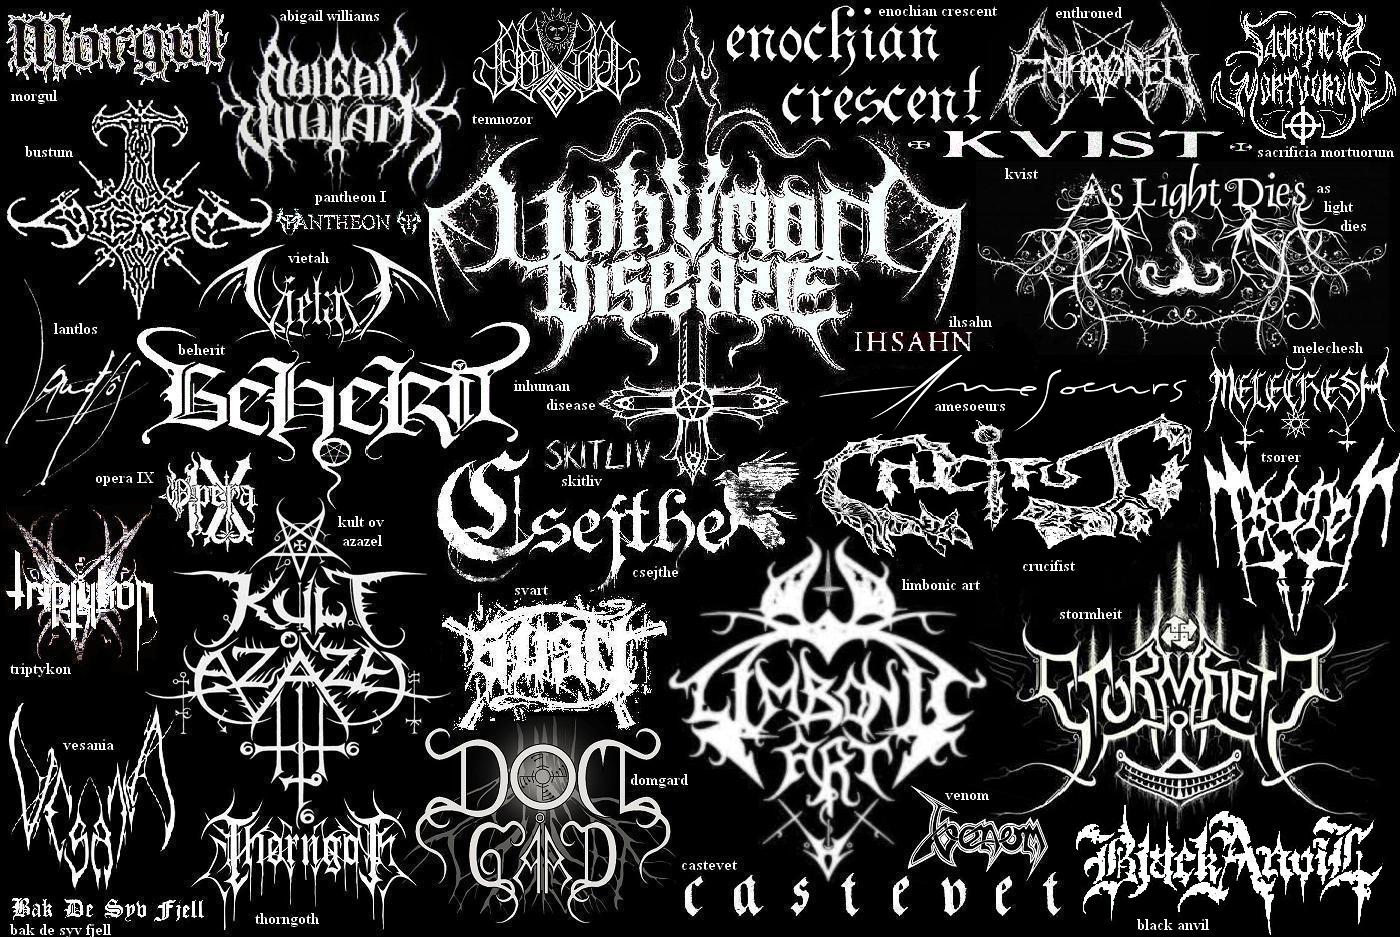 Black Metal Bands Images And Quotes. QuotesGram